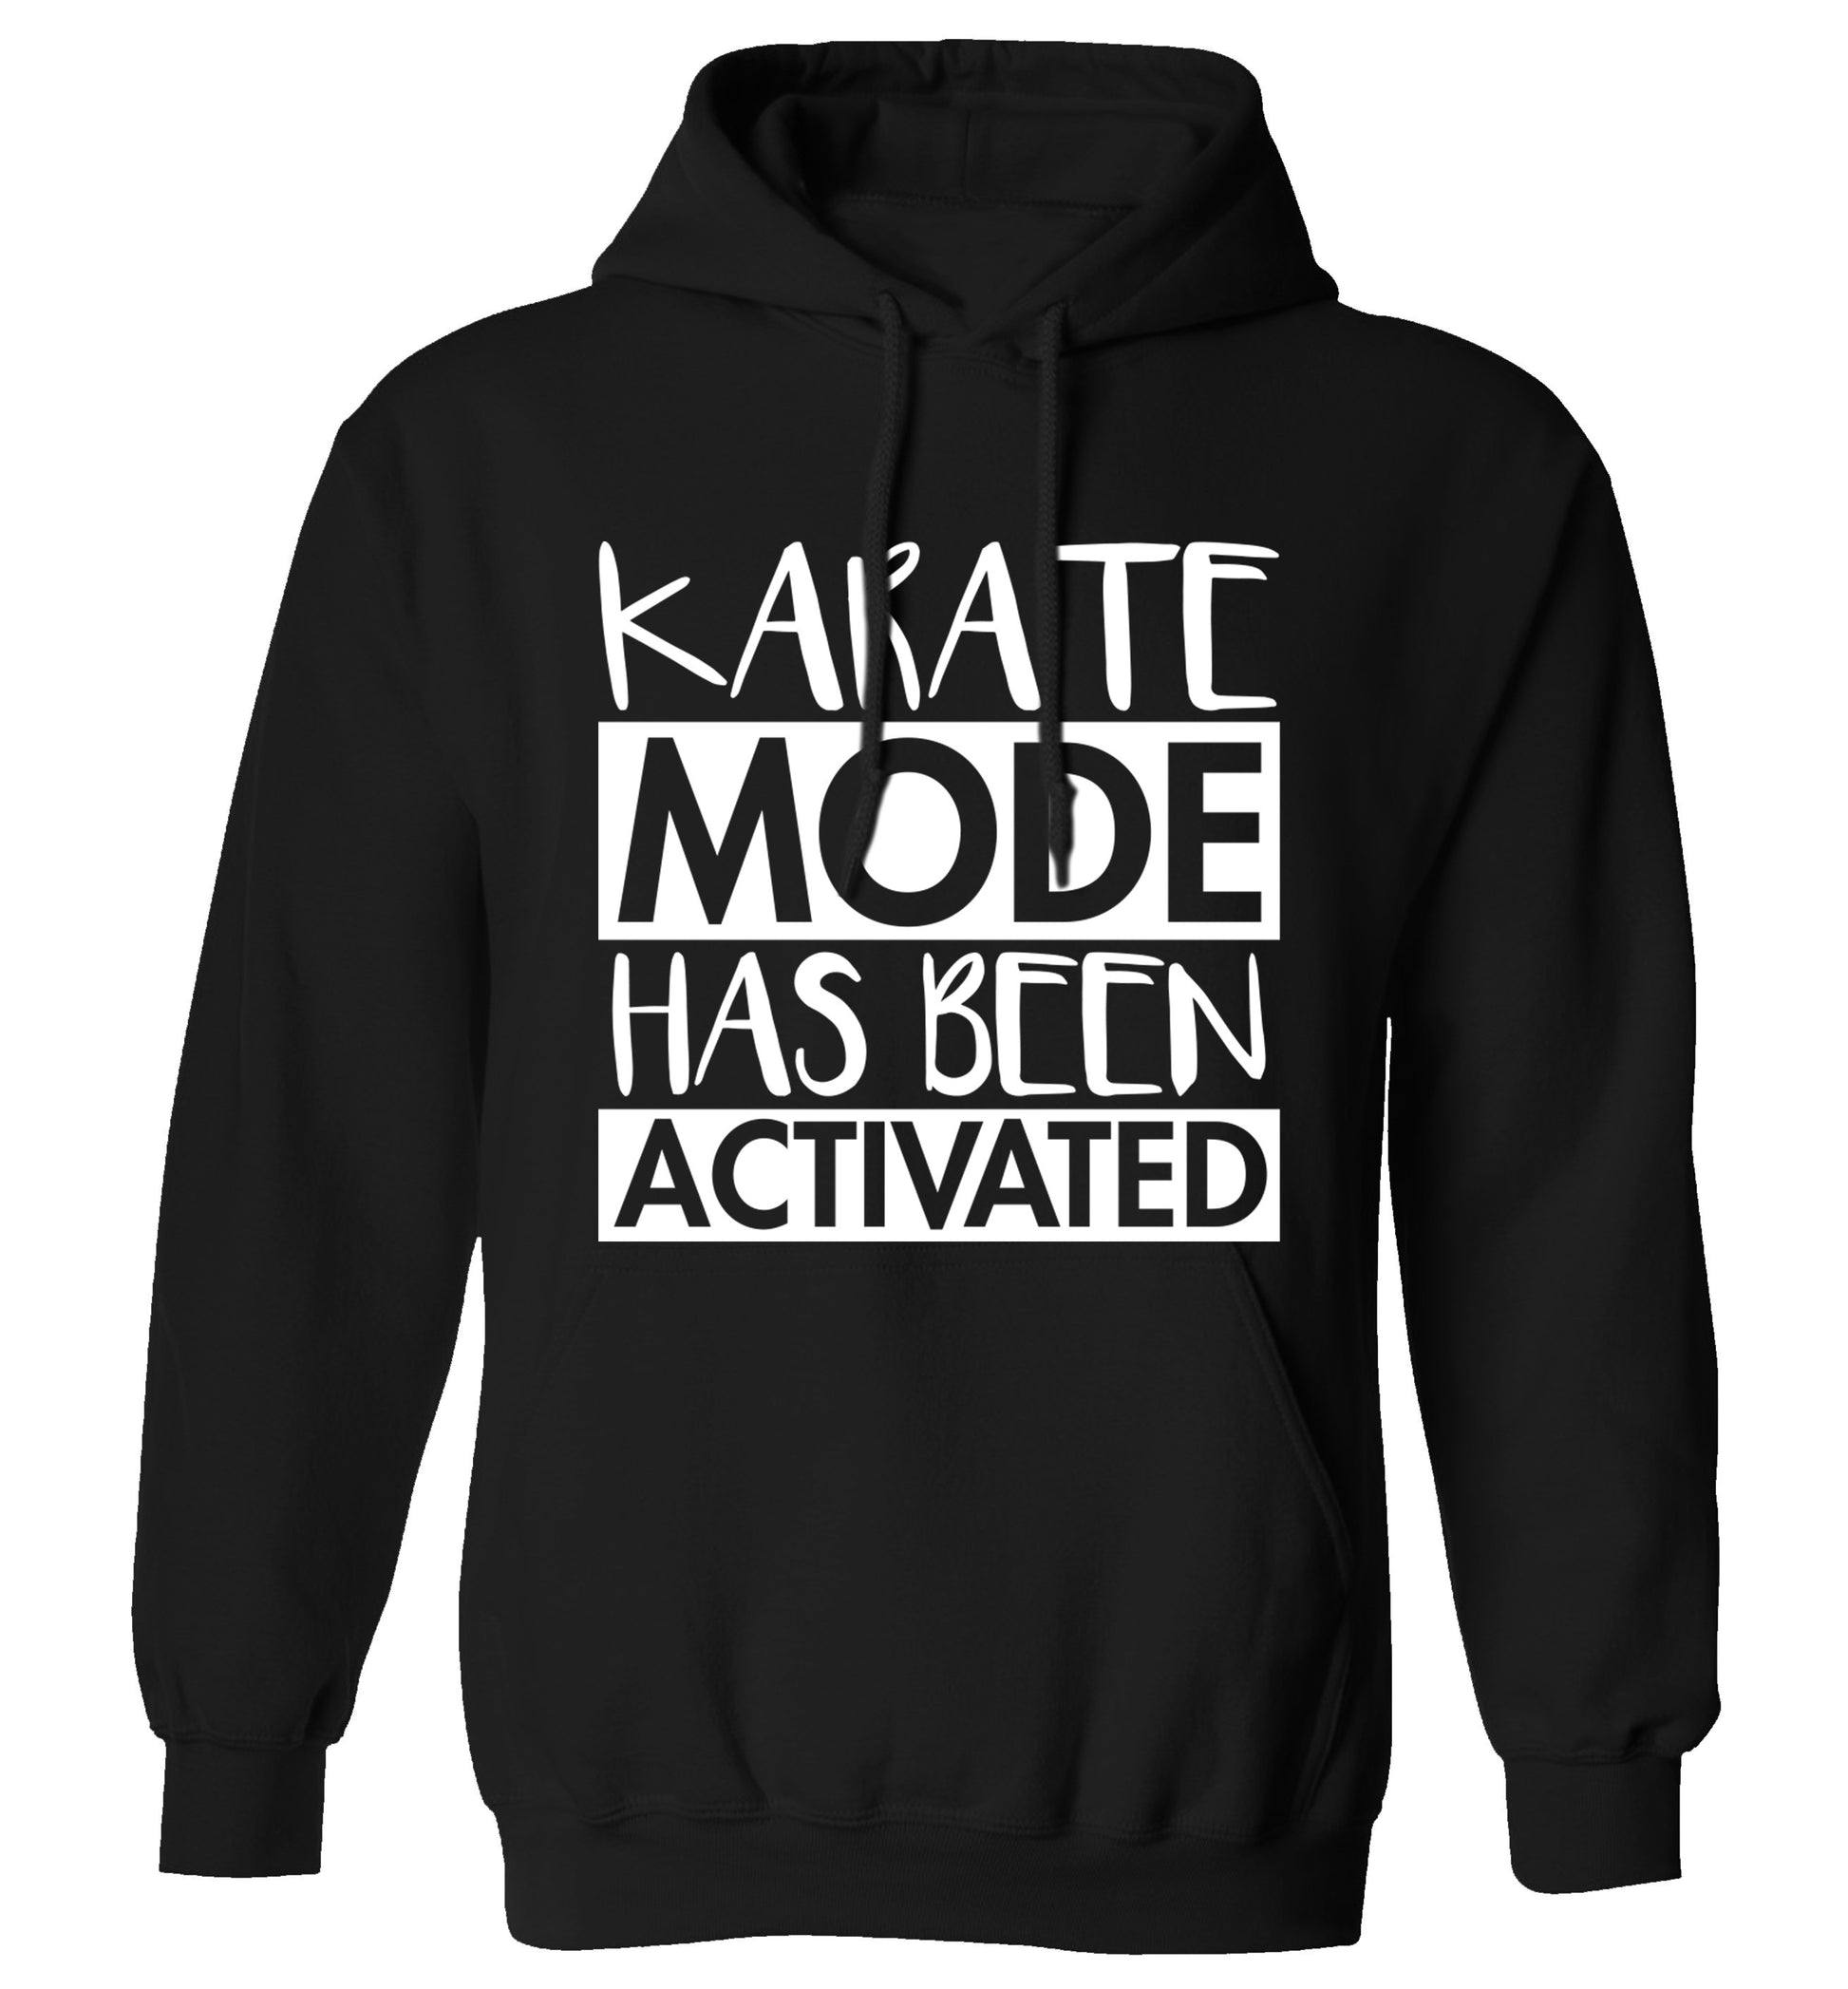 Karate mode activated adults unisex black hoodie 2XL